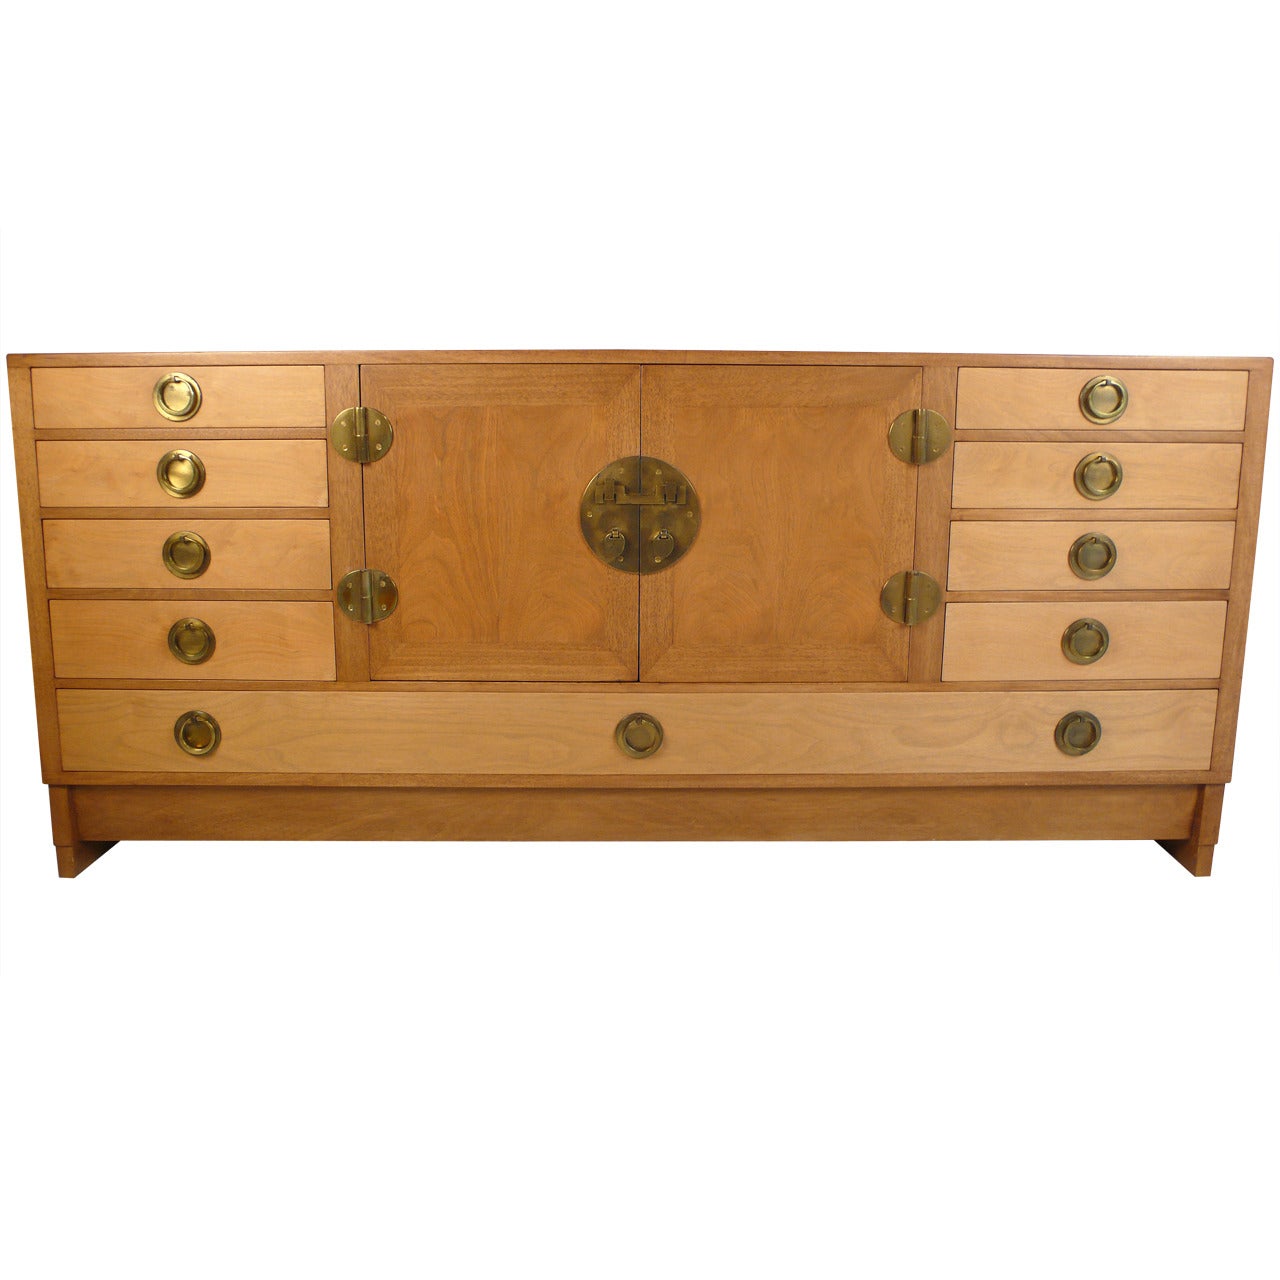 Edward Wormley Credenza / Server for Dunbar in Bleached Walnut and Brass